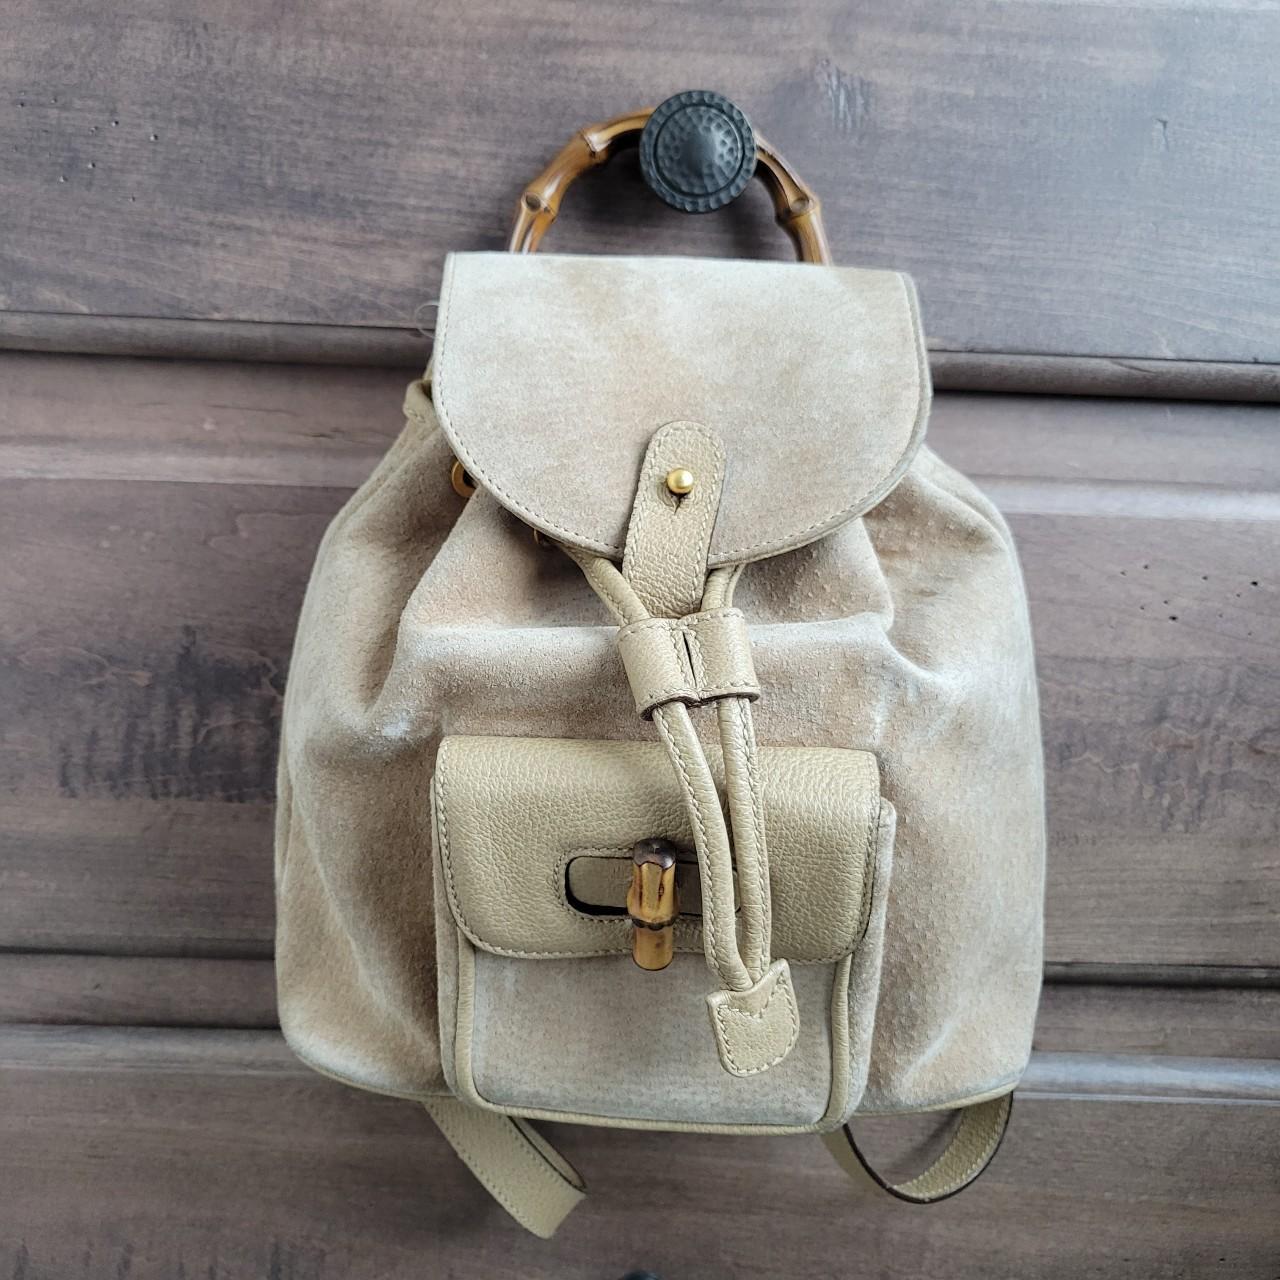 Gucci Bamboo Backpack Brown